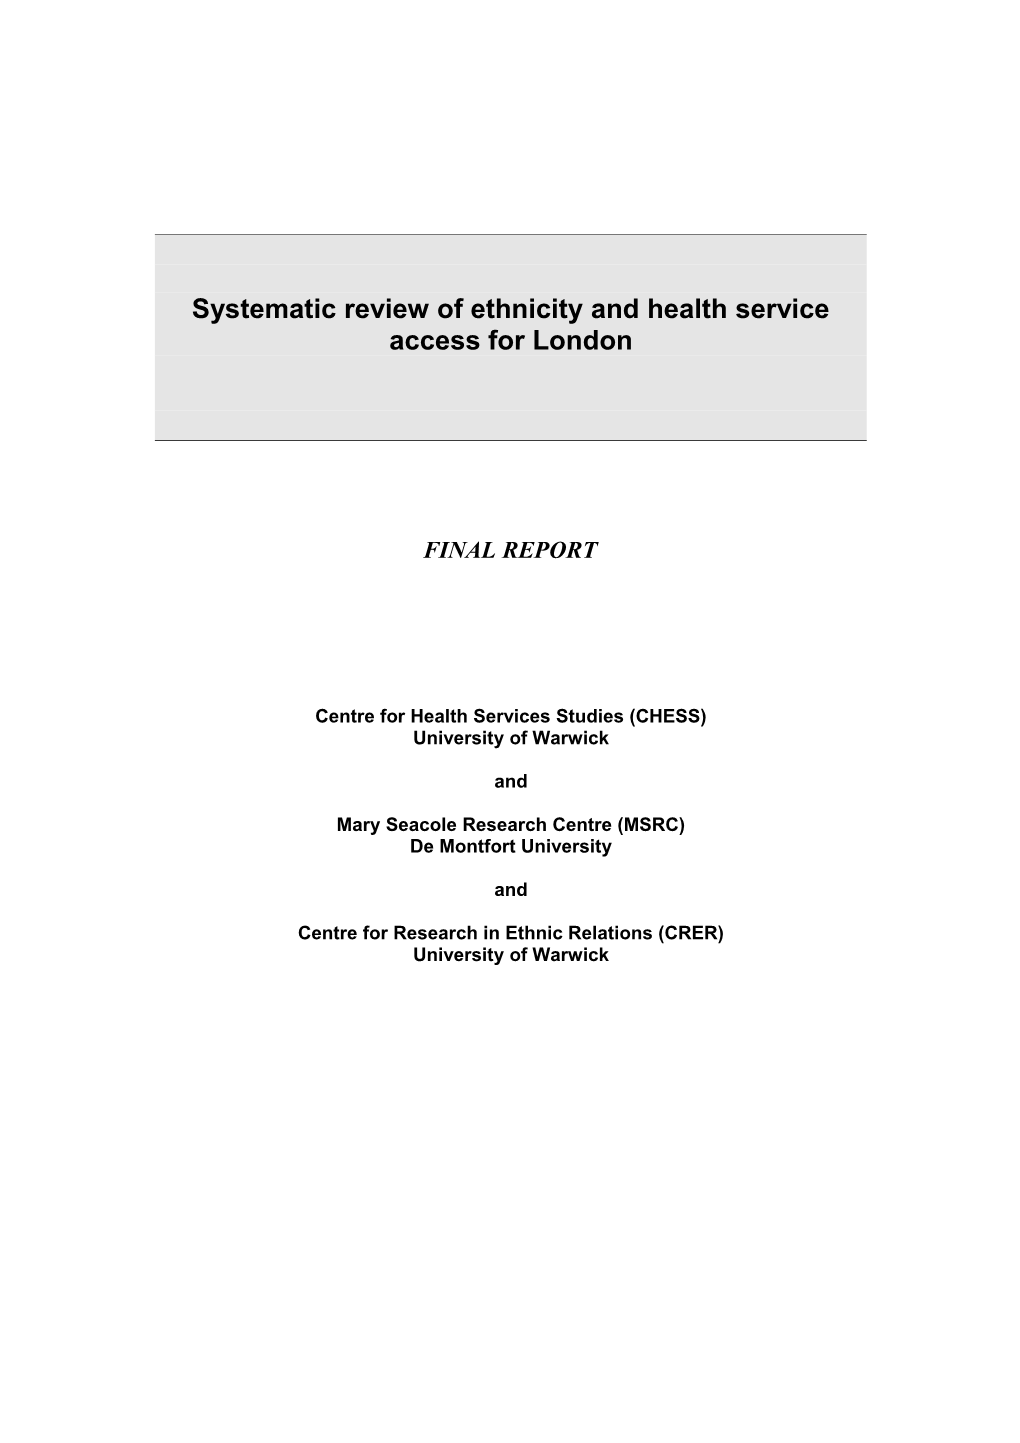 Systematic Review of Ethnicity and Health Service Access for London